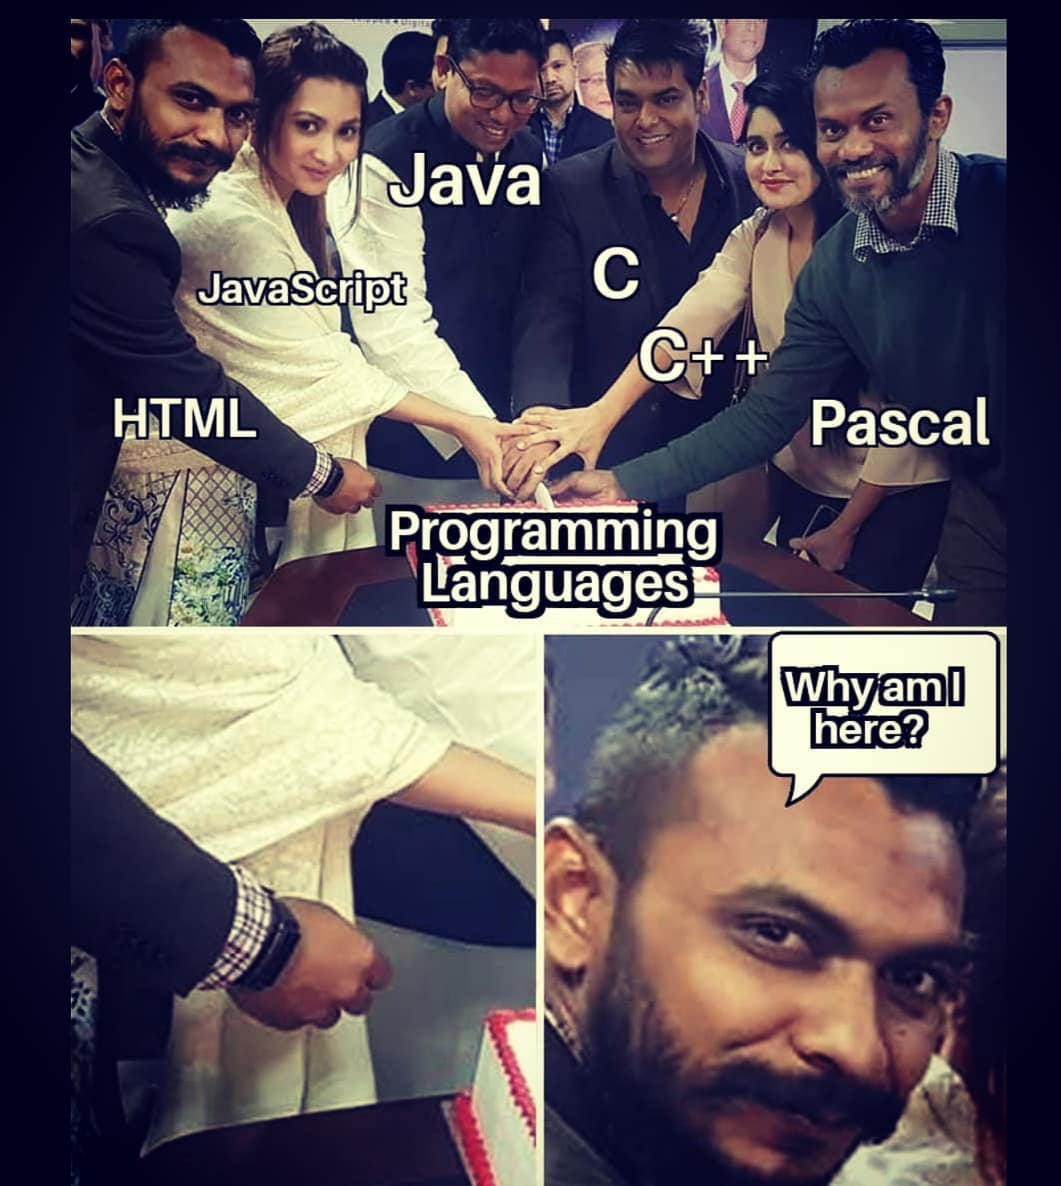 😂😂
If You Agree With This, Like 👍, Share, Retweet & Comment

Follow For More 🔥
Follow Me :- @gopimishra711 

#programming #coding #programmer #MEMES #coders #html #css #css3 #javascript #cplusplusprogramming #csharpprogramming #SoftwareDeveloper #python #pythonprogramming